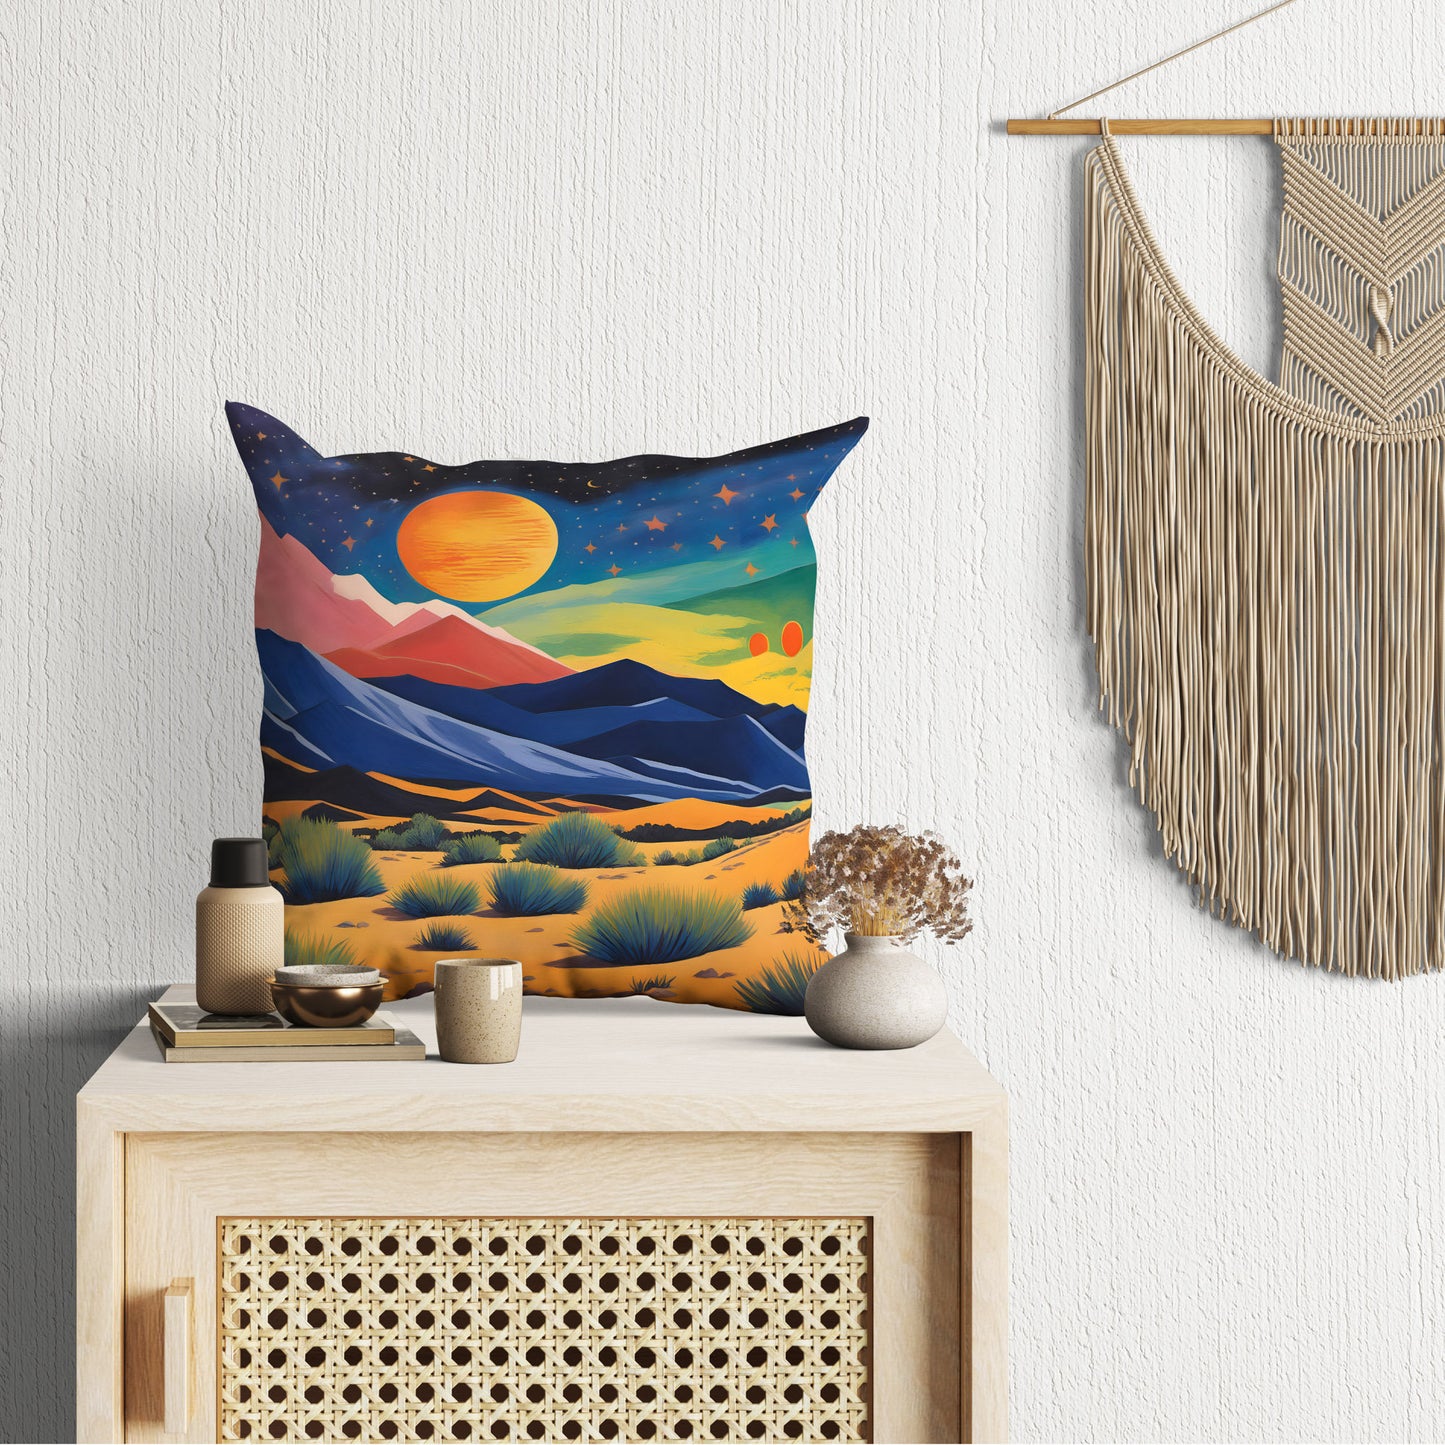 Astronomy Nights In Great Sand Dunes National Park, Colorado Throw Pillow, Usa Travel Pillow, Art Pillow, Colorful Pillow Case, 16X16 Case